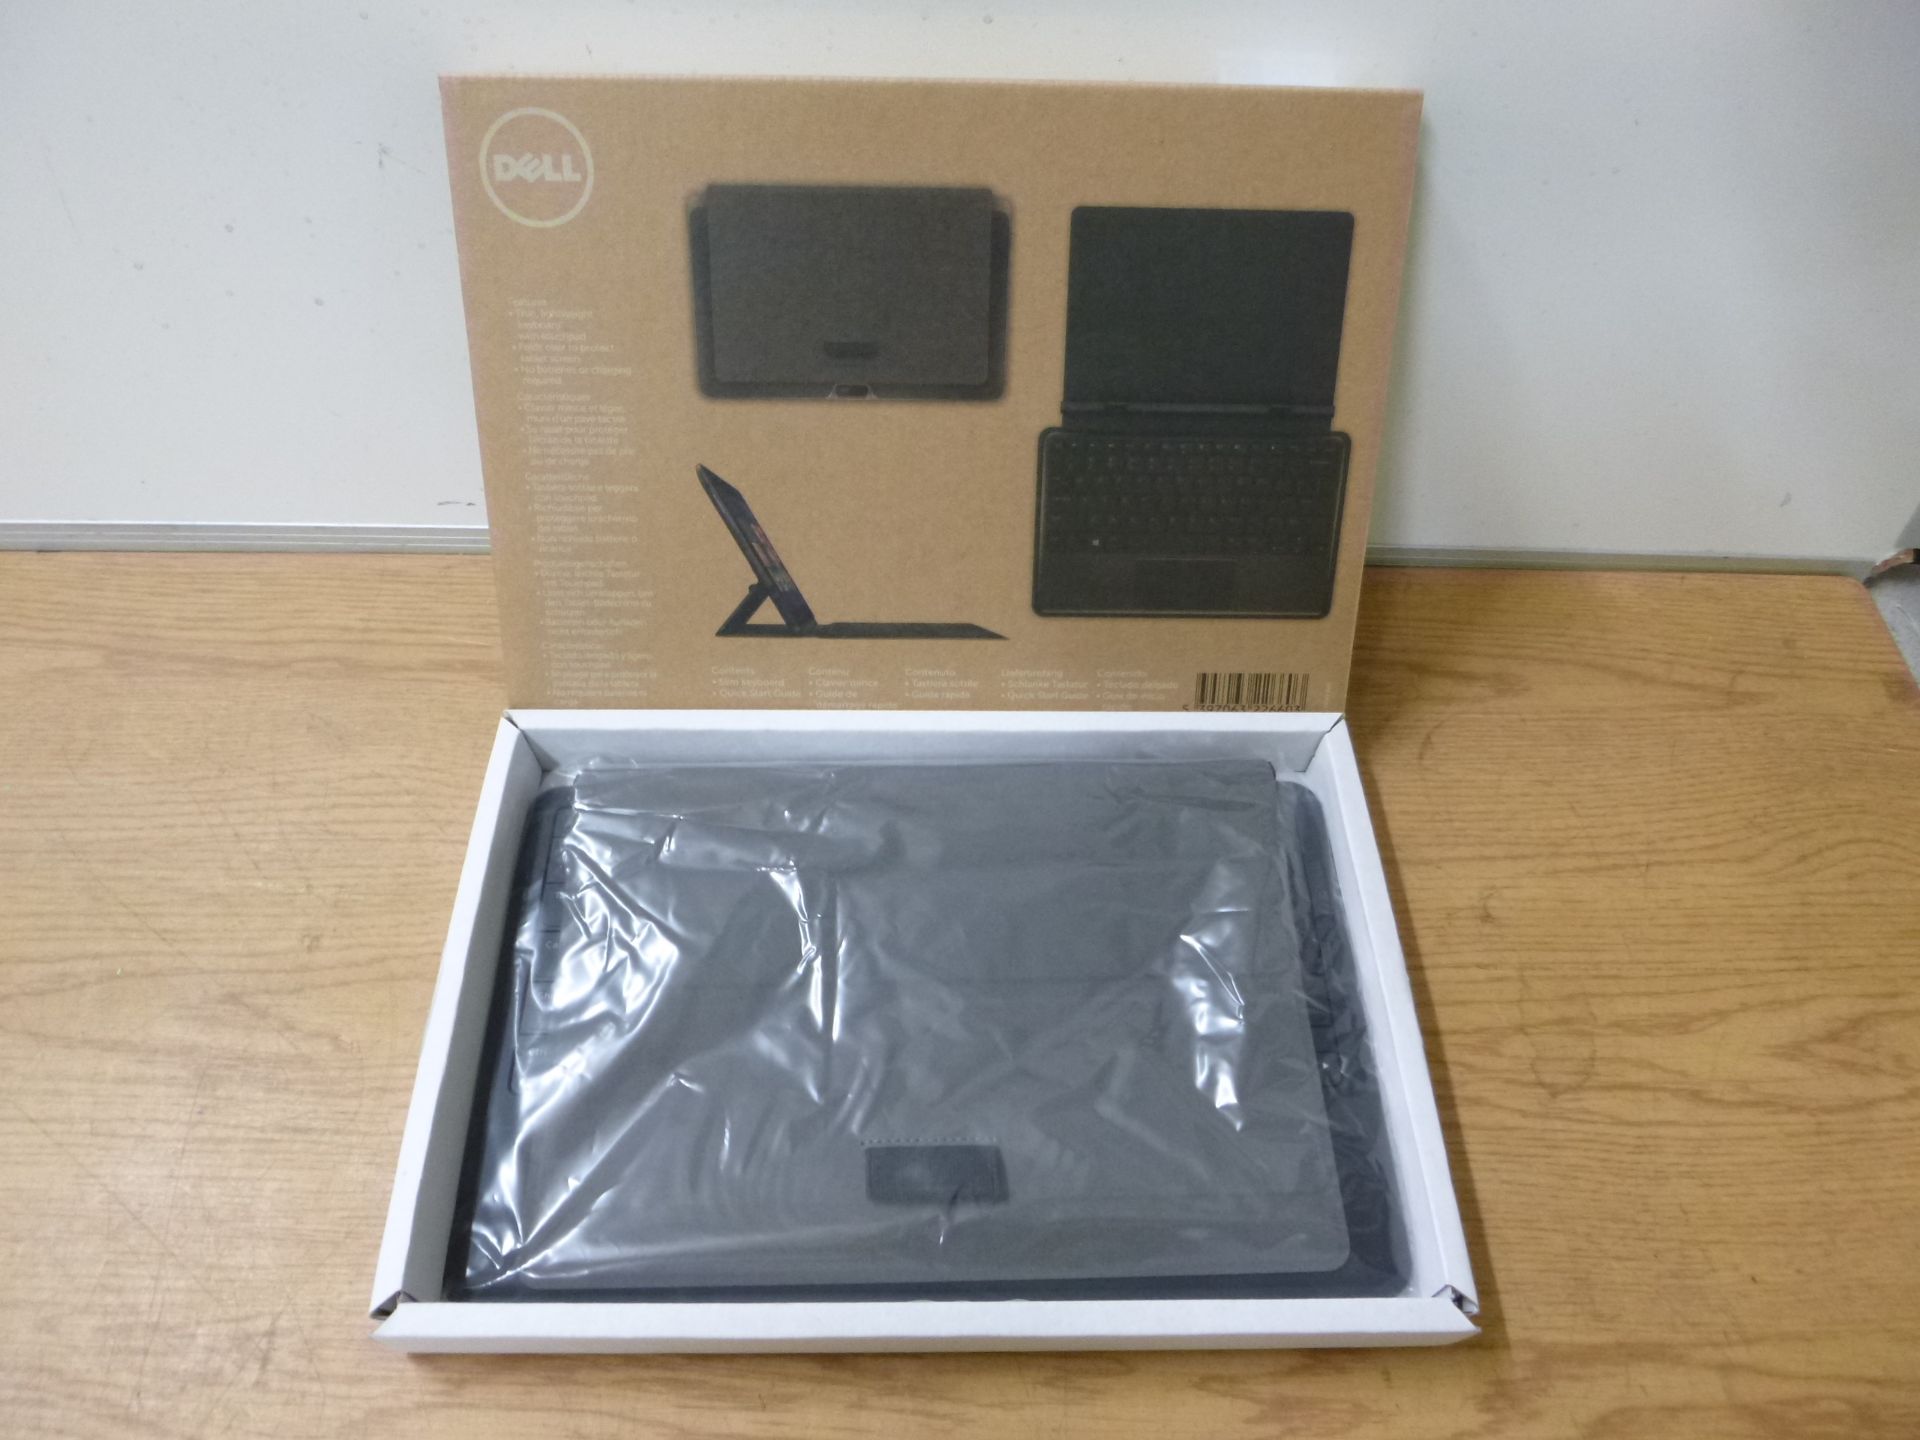 DELL SLIM TABLET KEYBOARD FOR DELL VENUE 11 PRO 5130 / 7130 / 7139 TABLET. BOXED.